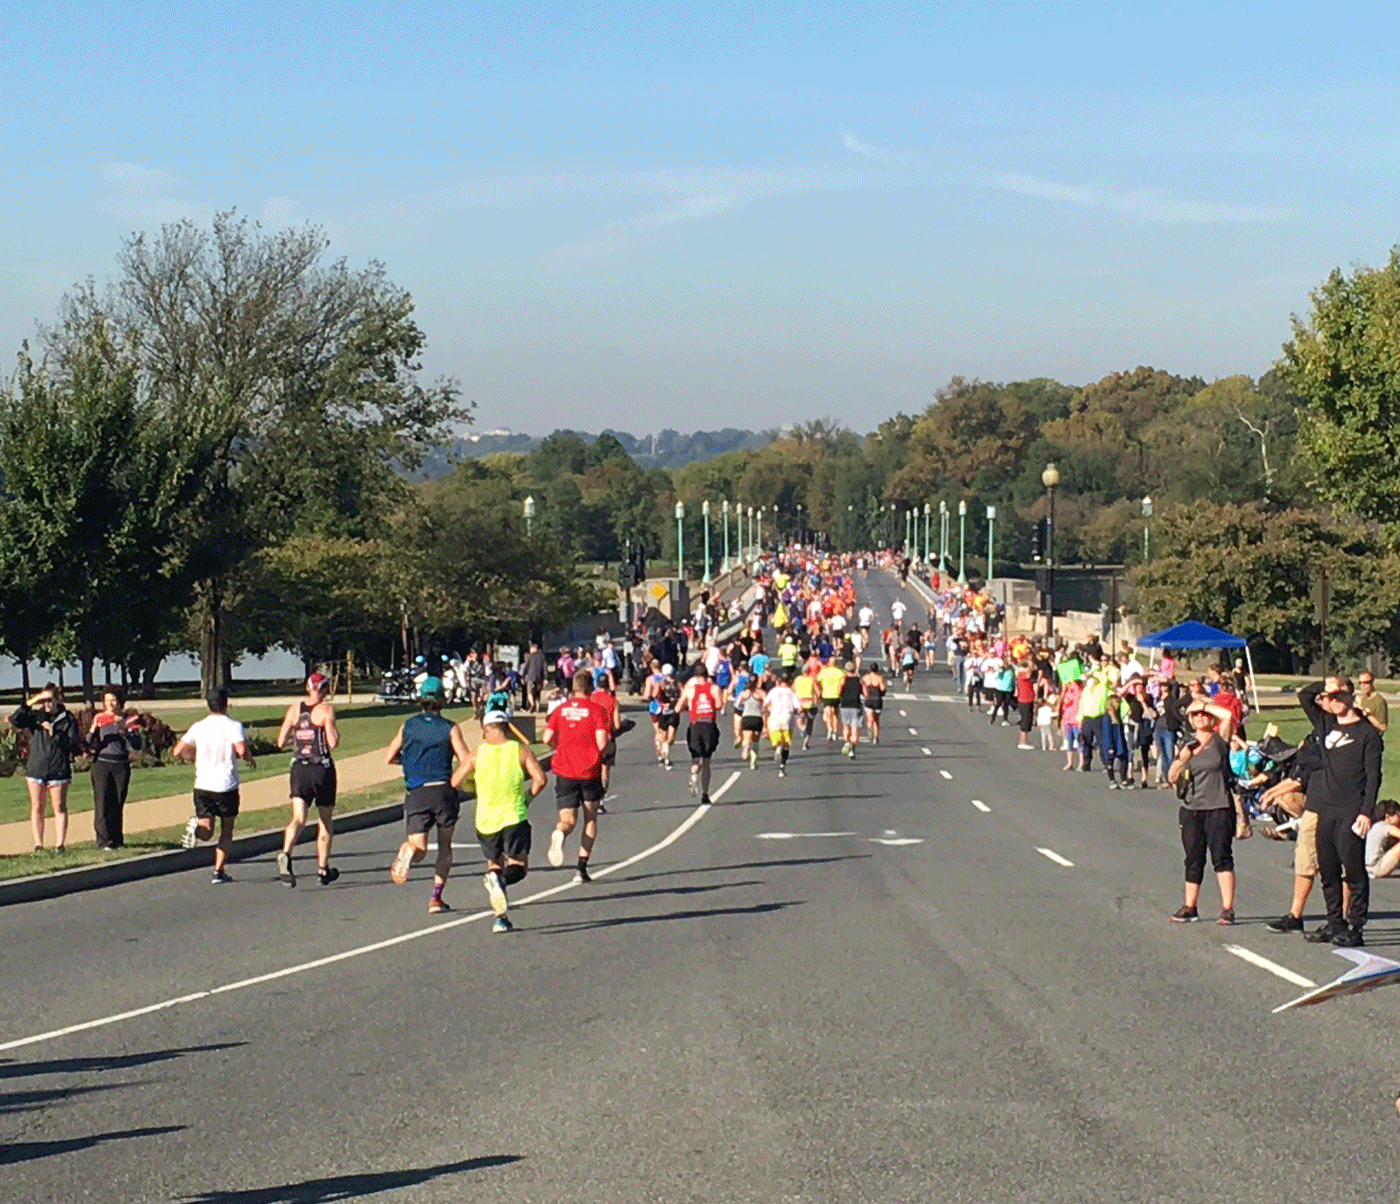 Runners participate in the 42nd Marine Corps Marathon on Oct. 22, 2017. (Courtesy Cody House)